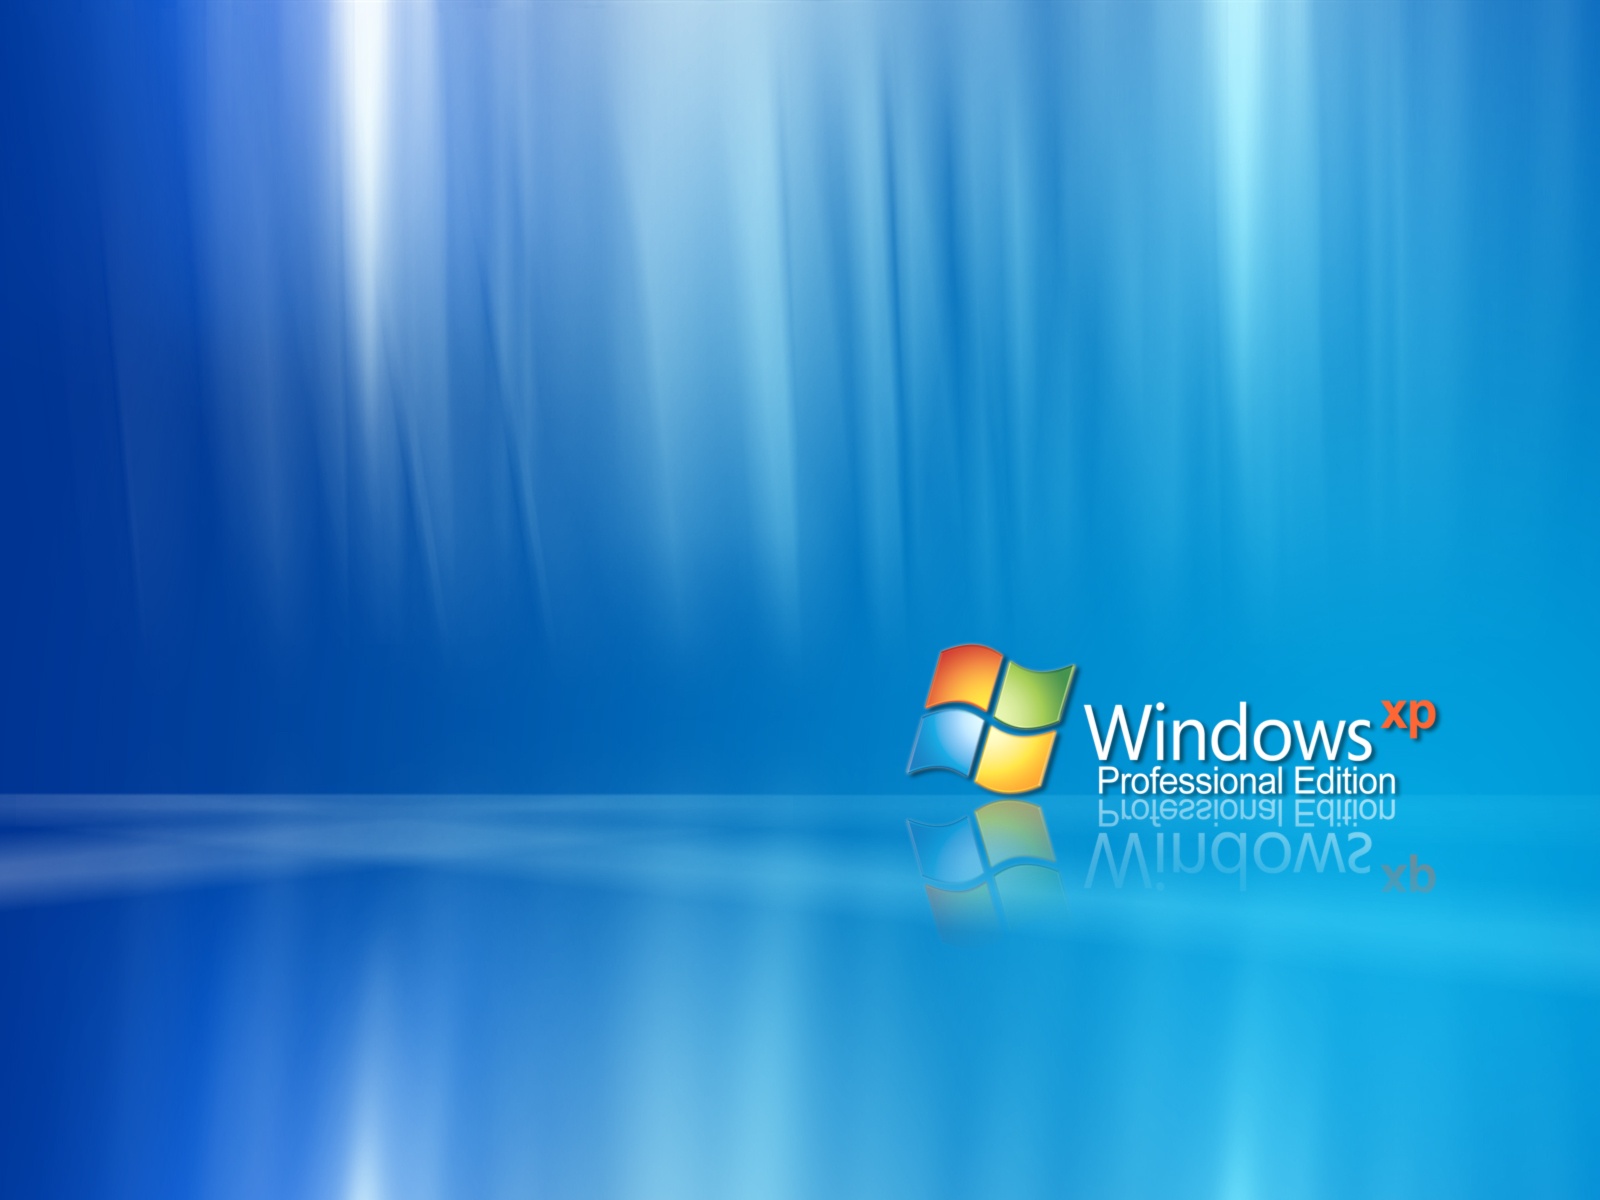 Ments To HD Windows Xp Wallpaper For